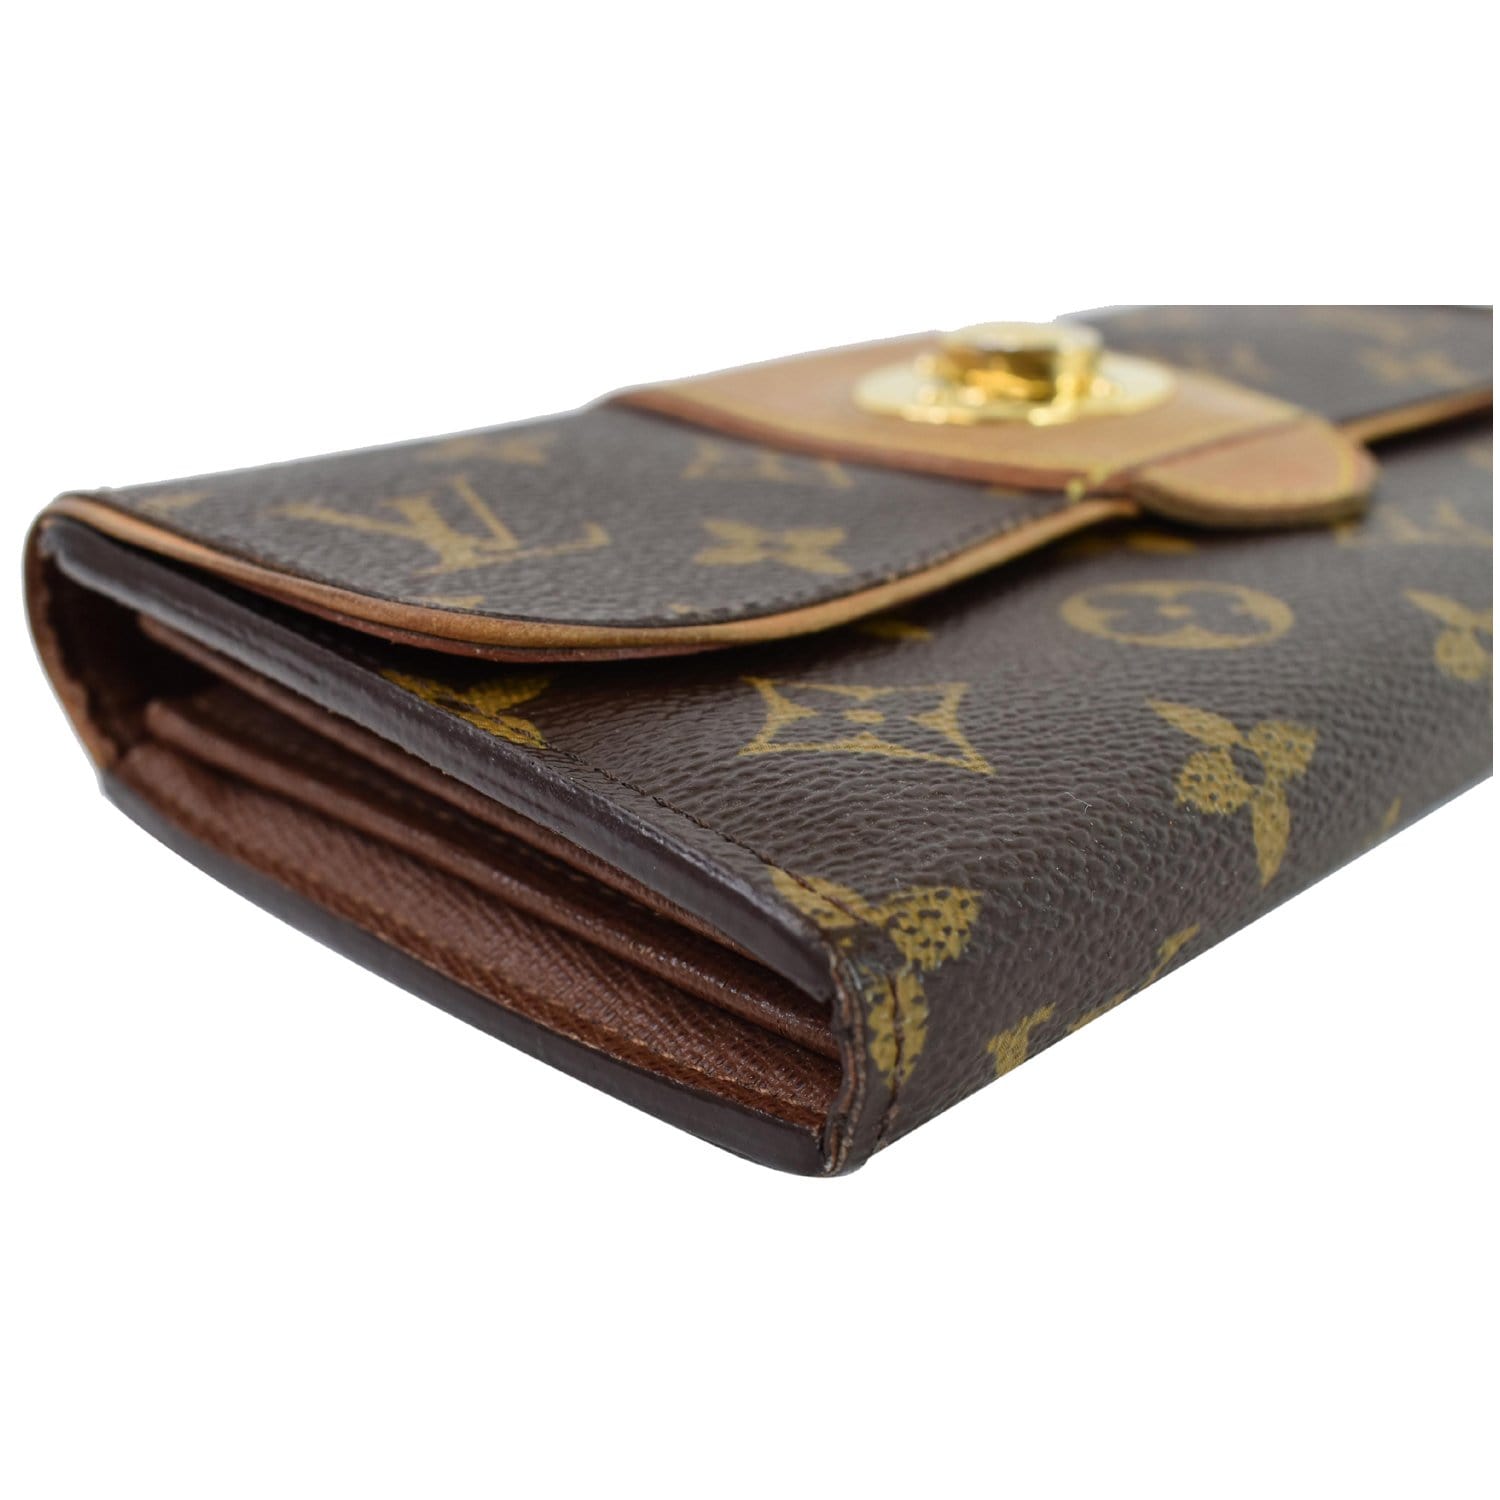 Lv Boetie Wallet Search  Natural Resource Department